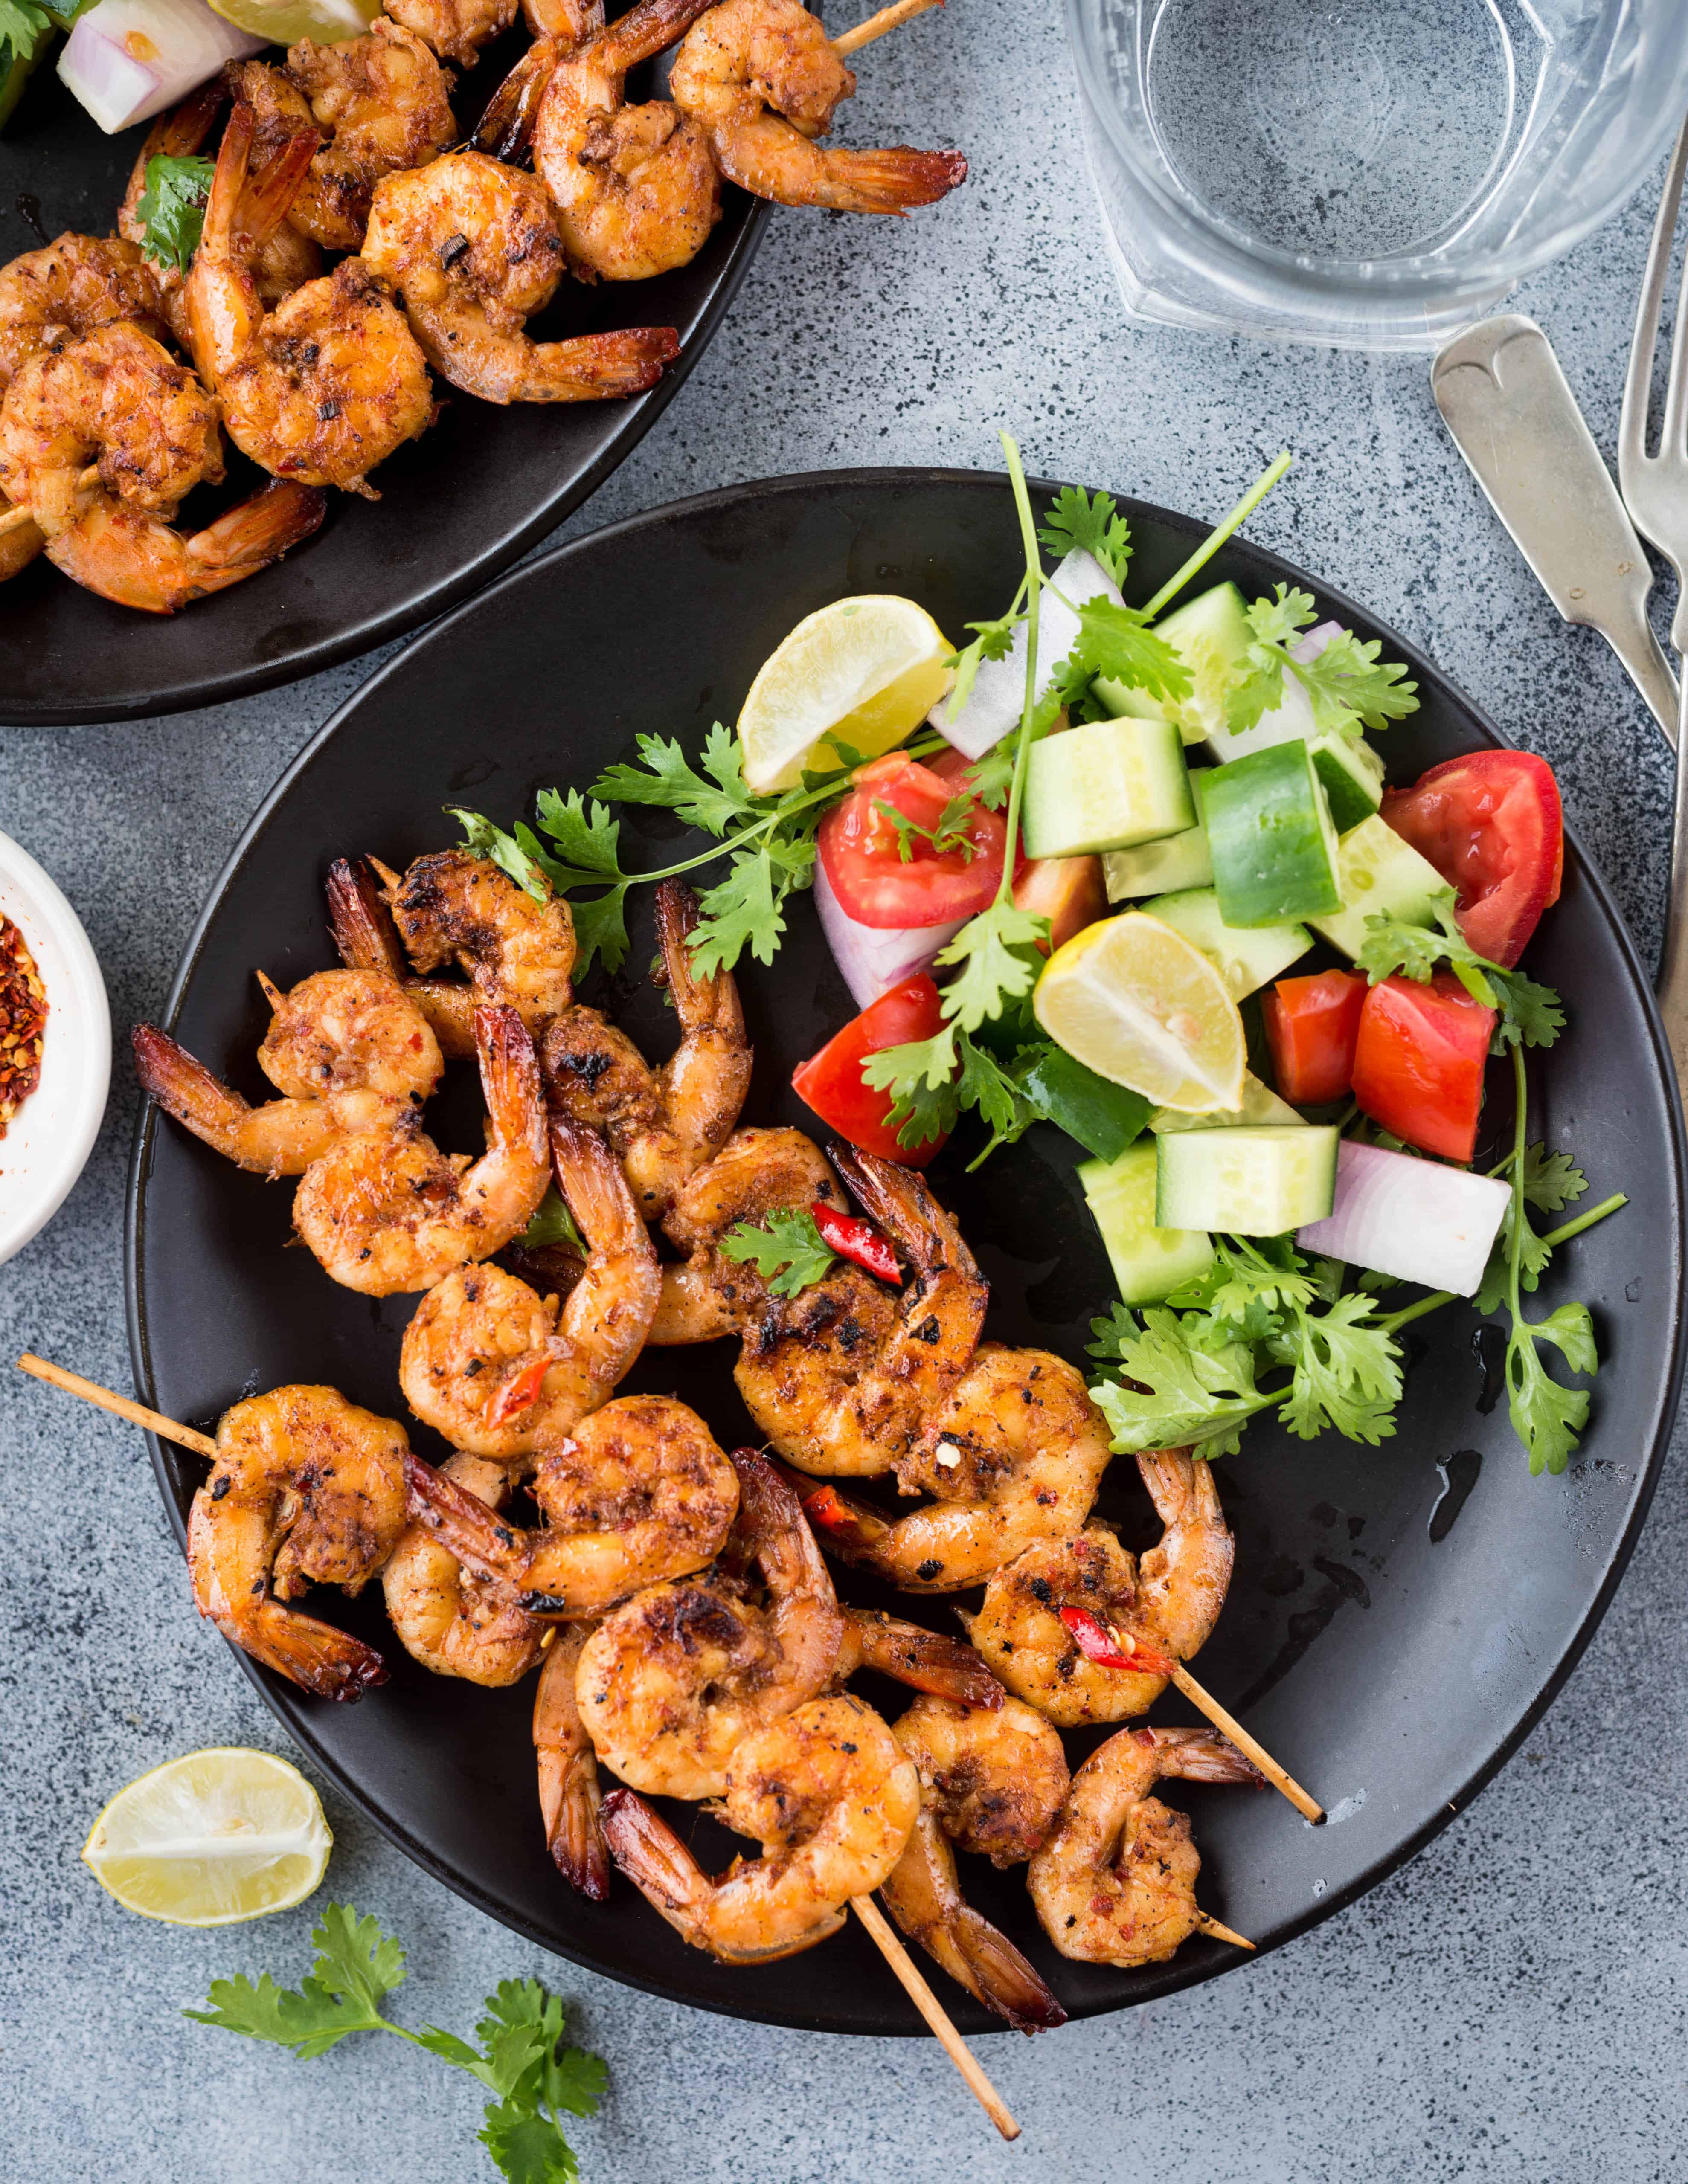  Vietnamese Grilled Shrimps are Shrimps marinated in lemongrass, fish sauce, spices and grilled till golden brown. Refreshing lemon flavour, pungent fish sauce and aromatic spices make grilled shrimps so delicious.